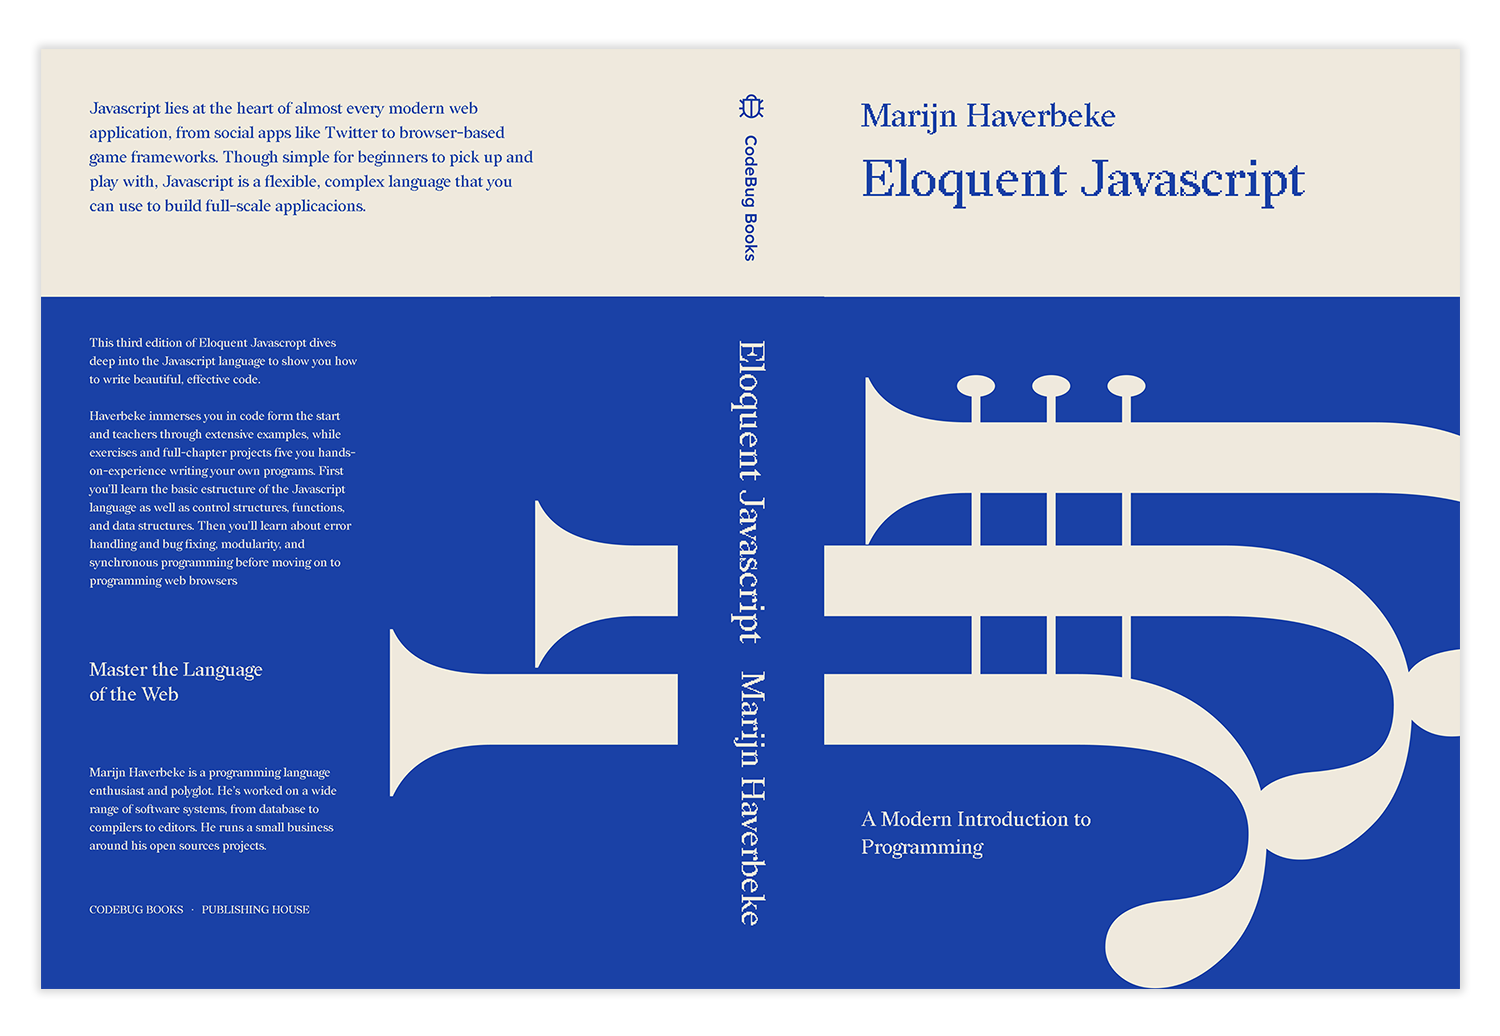 Cover design for "Eloquent Javascript". It is a vector design in electric blue and cream colors. It displays the front cover, spine, and back cover. On the front cover, there is a visual play between the letter J and a wind instrument.